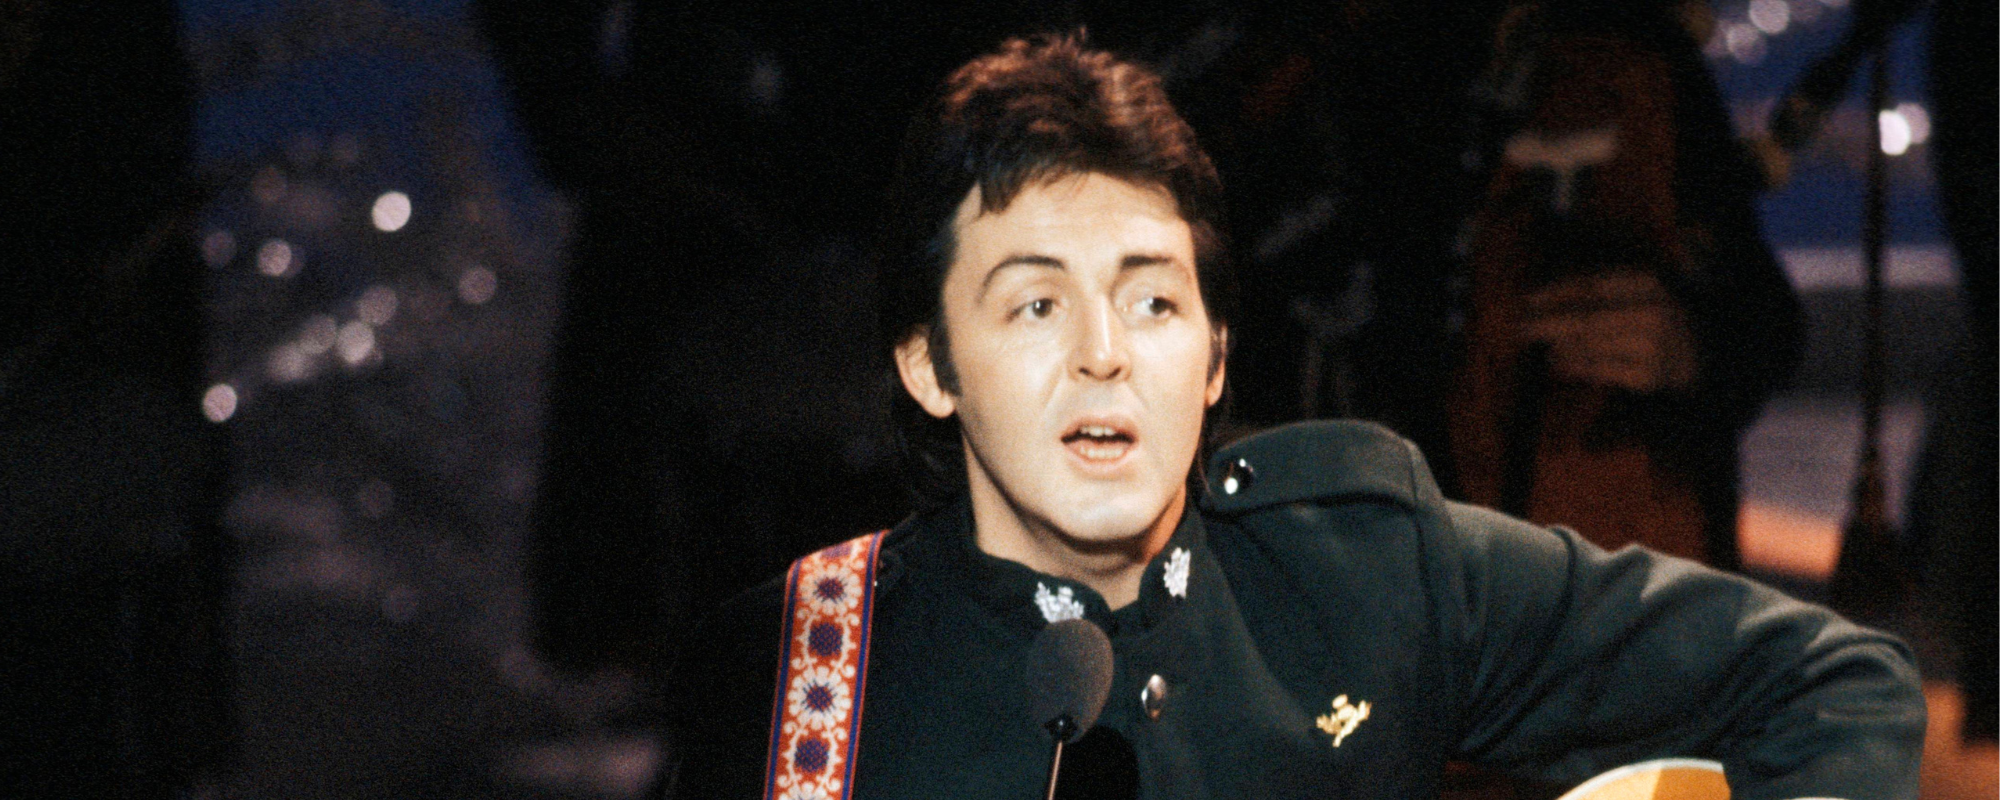 Look: Paul McCartney, The Rolling Stones, and More Share Christmas Wishes With Fans